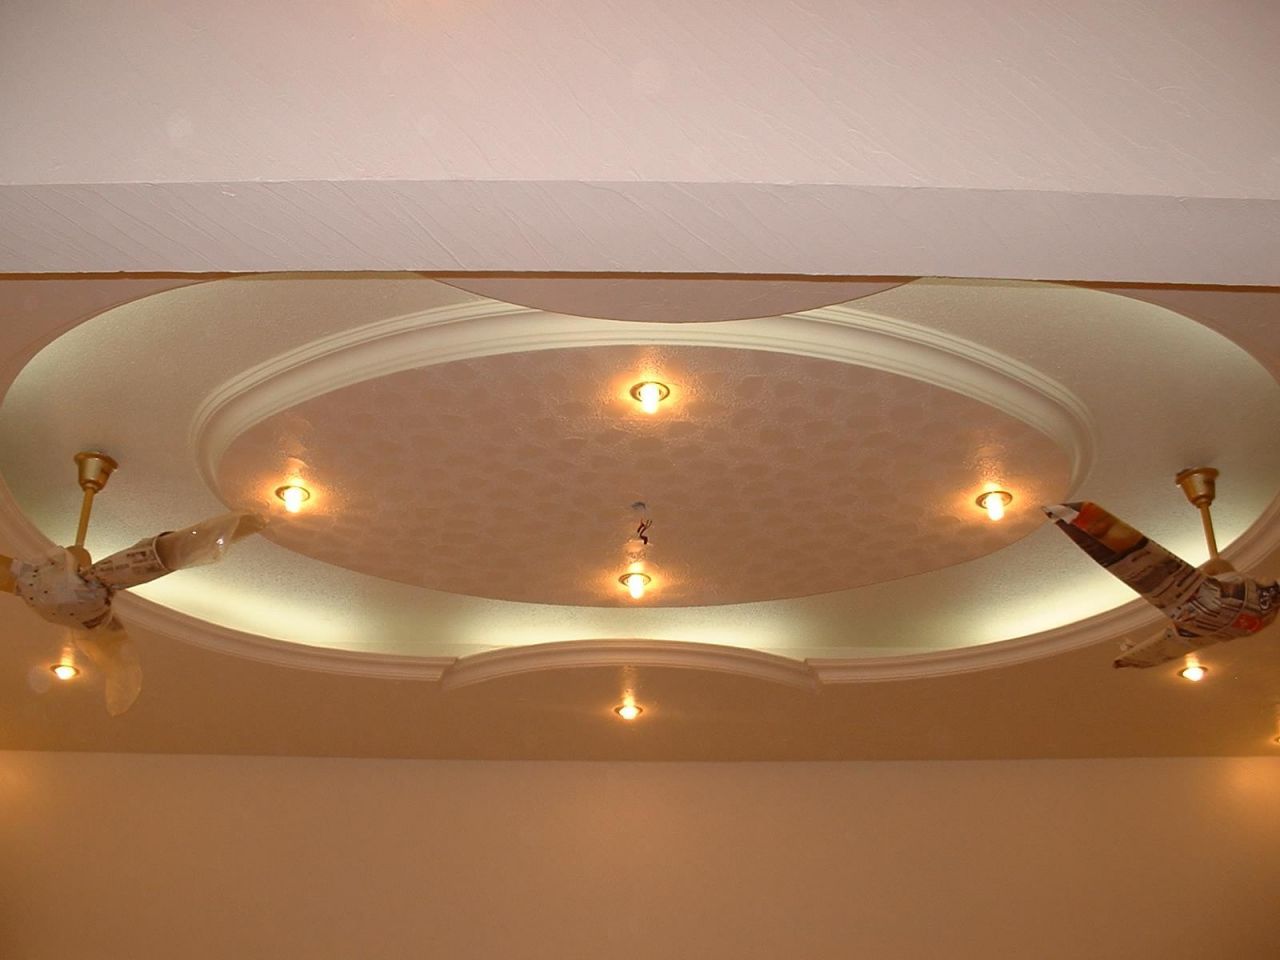 Pop Ceiling Design For Hall With Fans Theteenline Down False